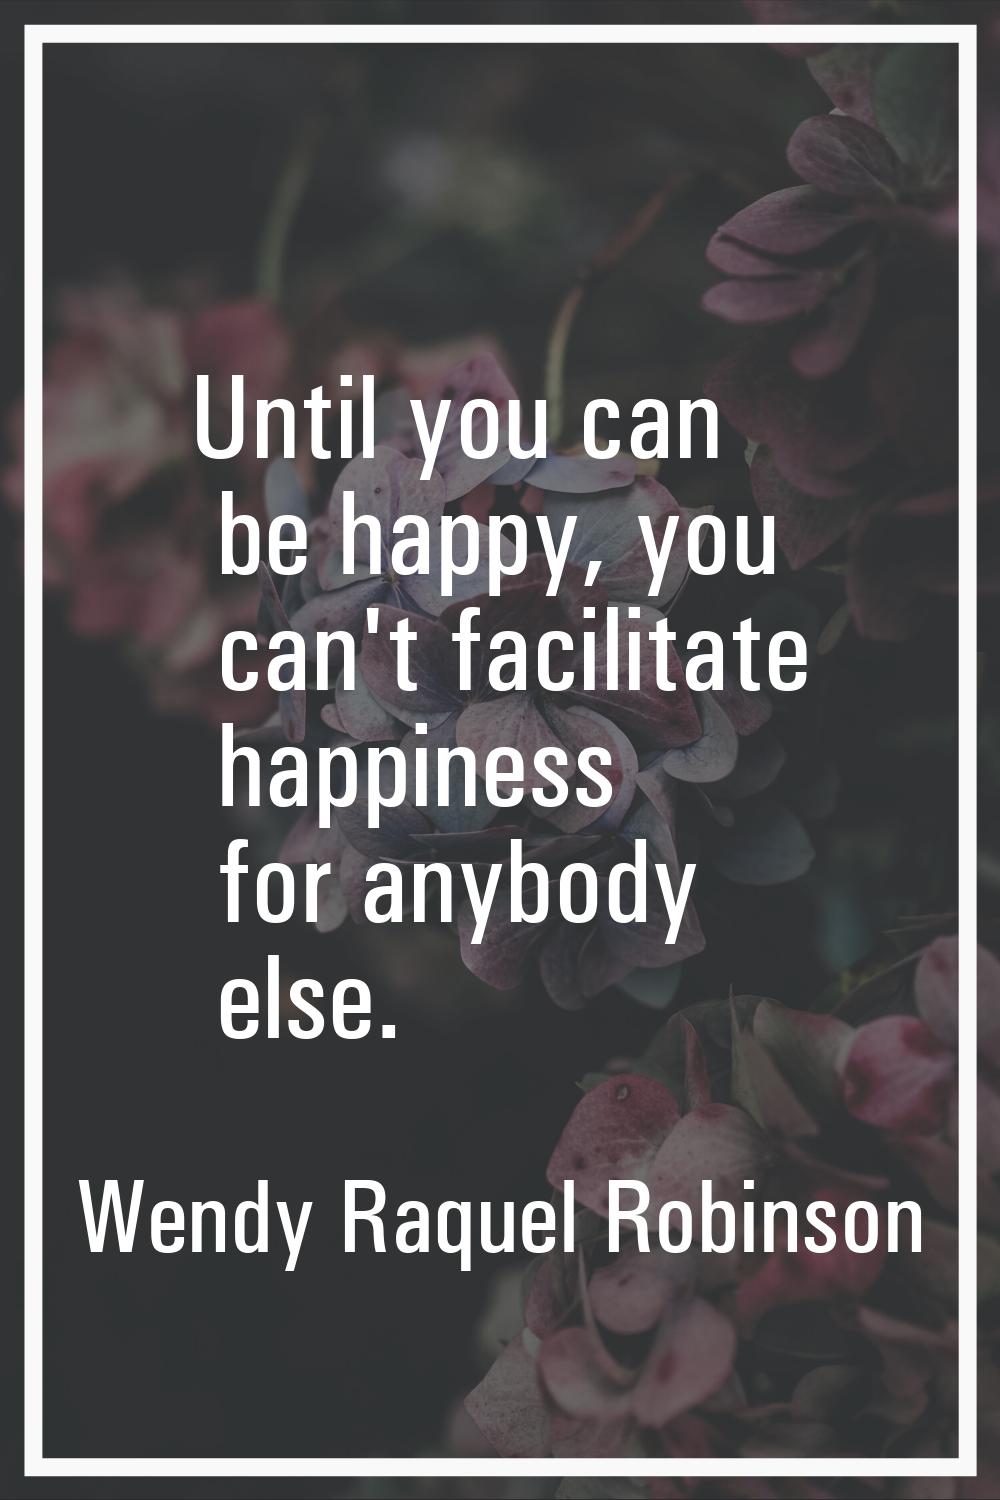 Until you can be happy, you can't facilitate happiness for anybody else.